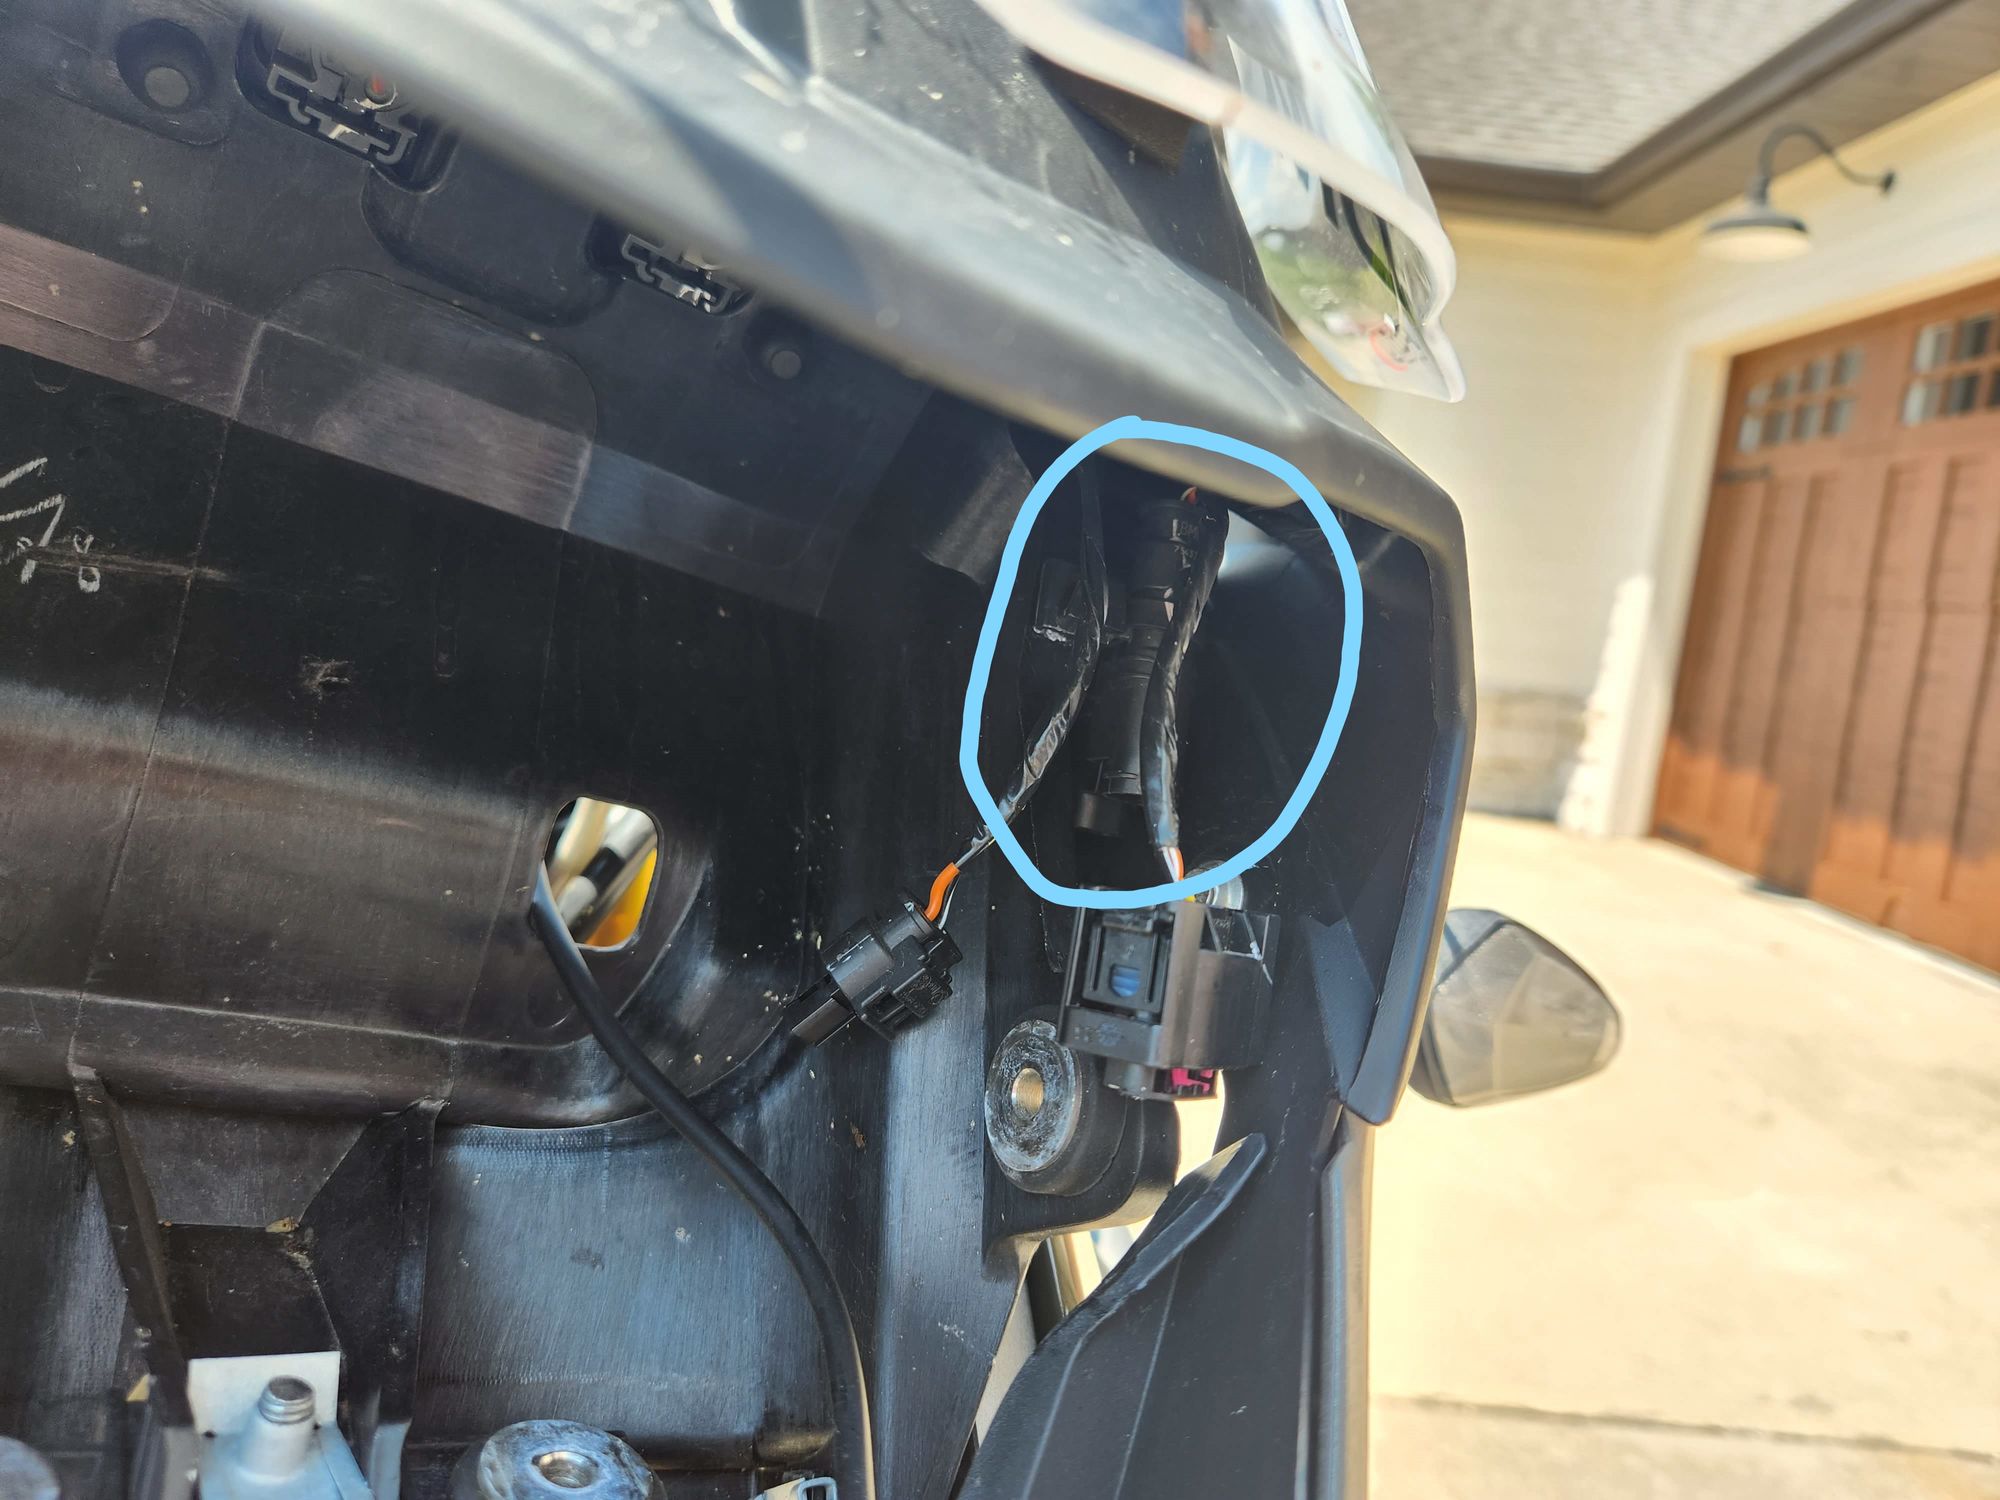 Where and How to Use the Accessory Port on a 2017+ BMW G310 GS